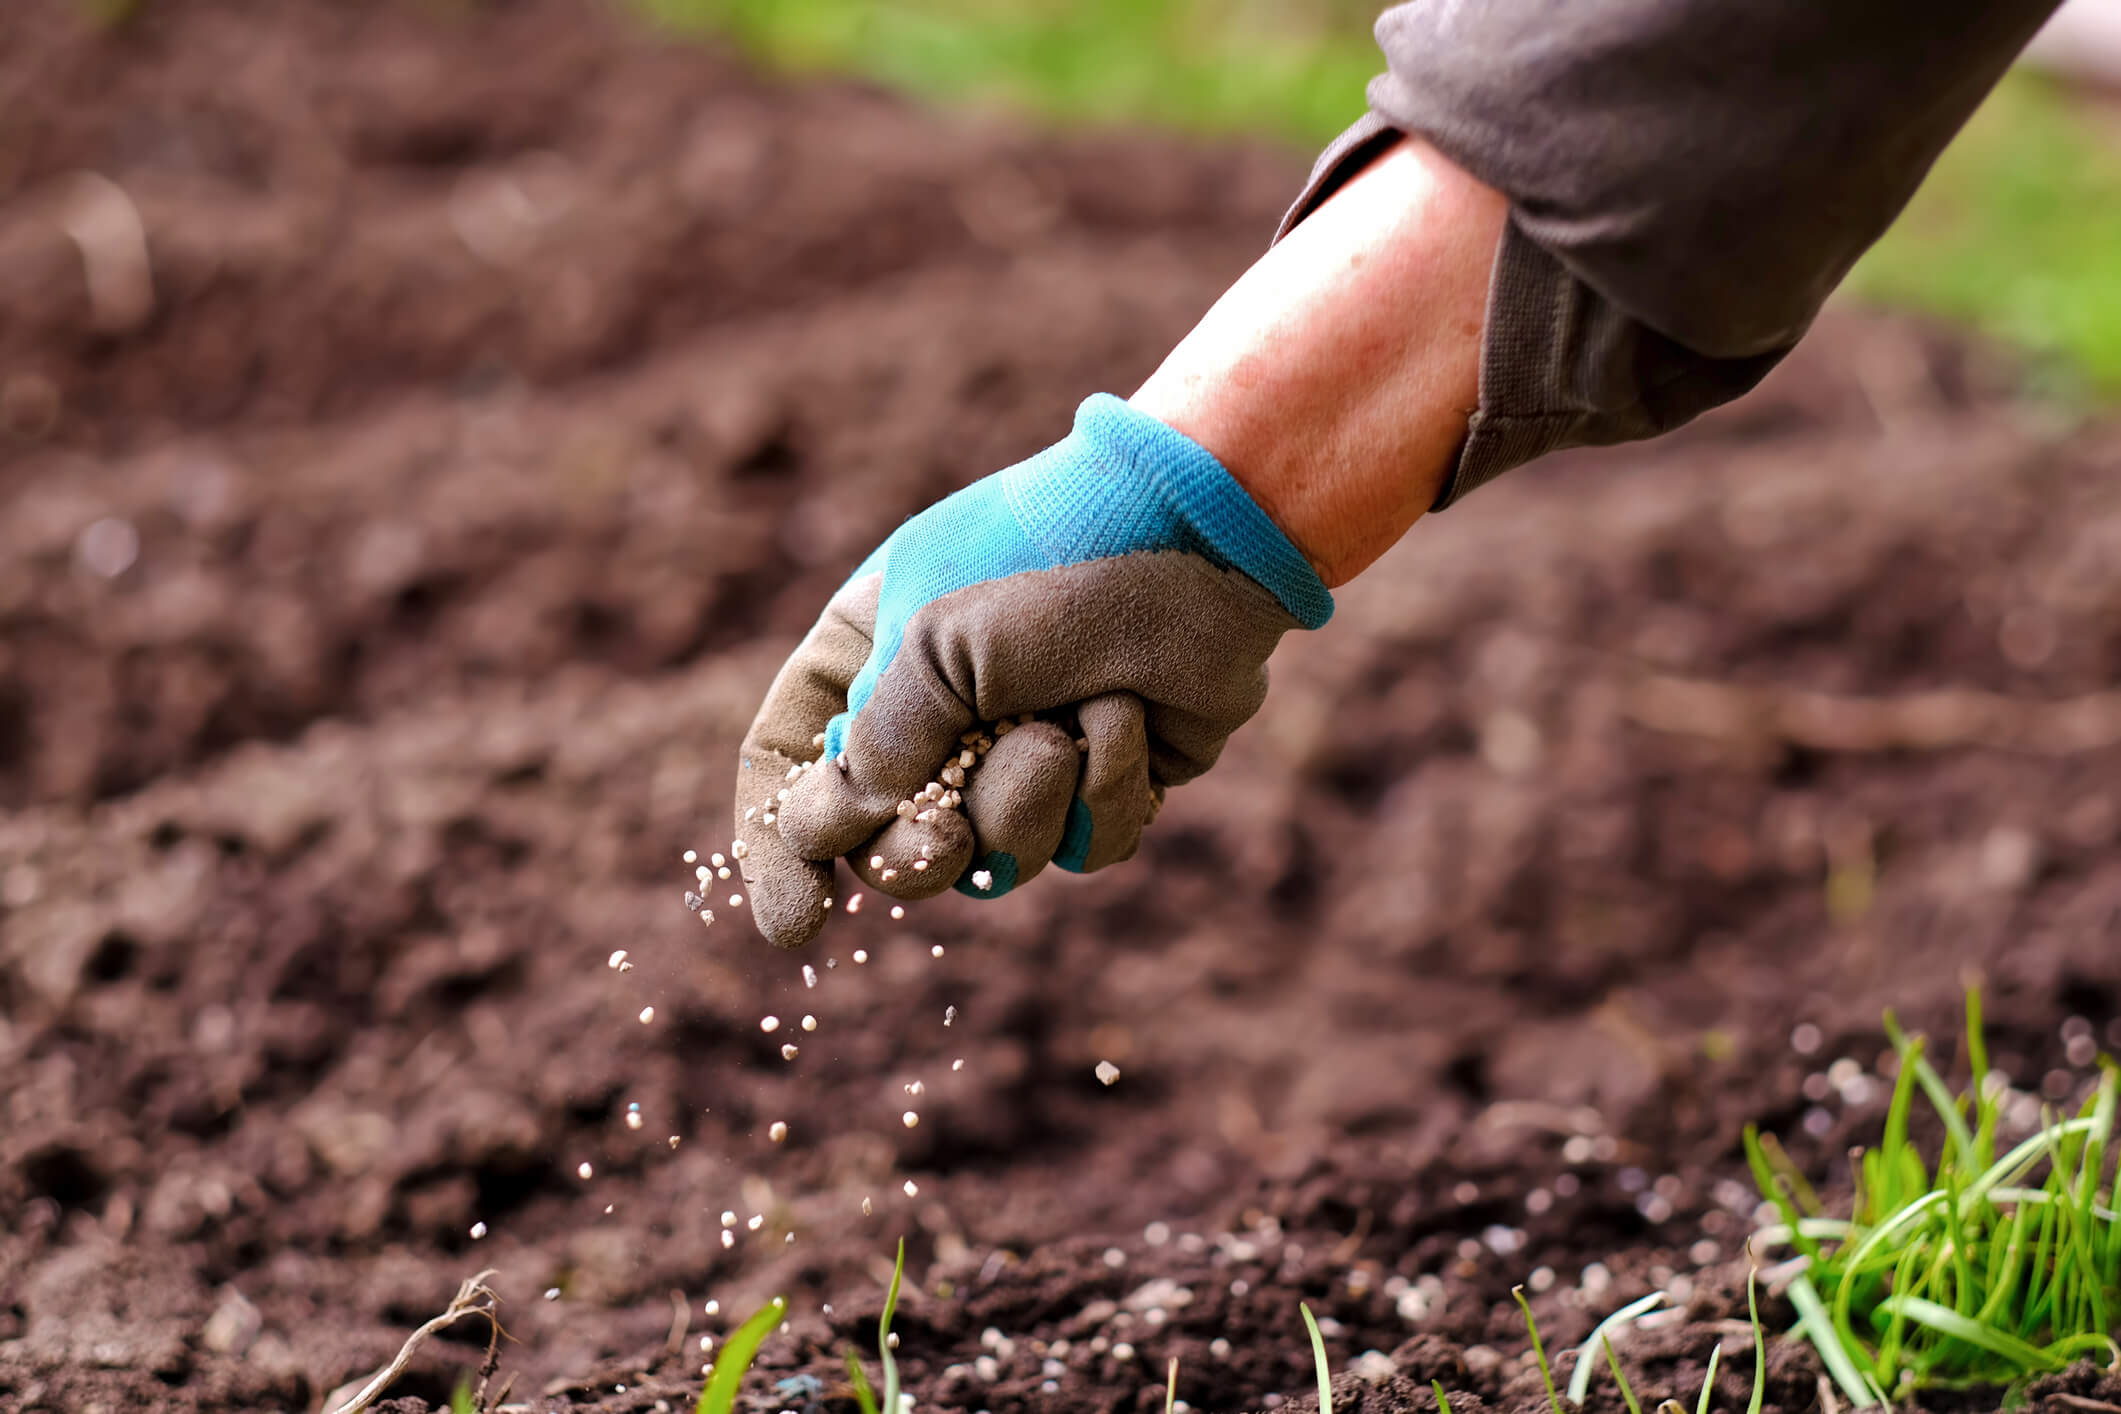 You would need about 70 pounds of compost to add the same amount of nutrients as 10 pounds of 10-10-10 fertilizer (containing 10% each nitrogen, phosphorus and potassium).